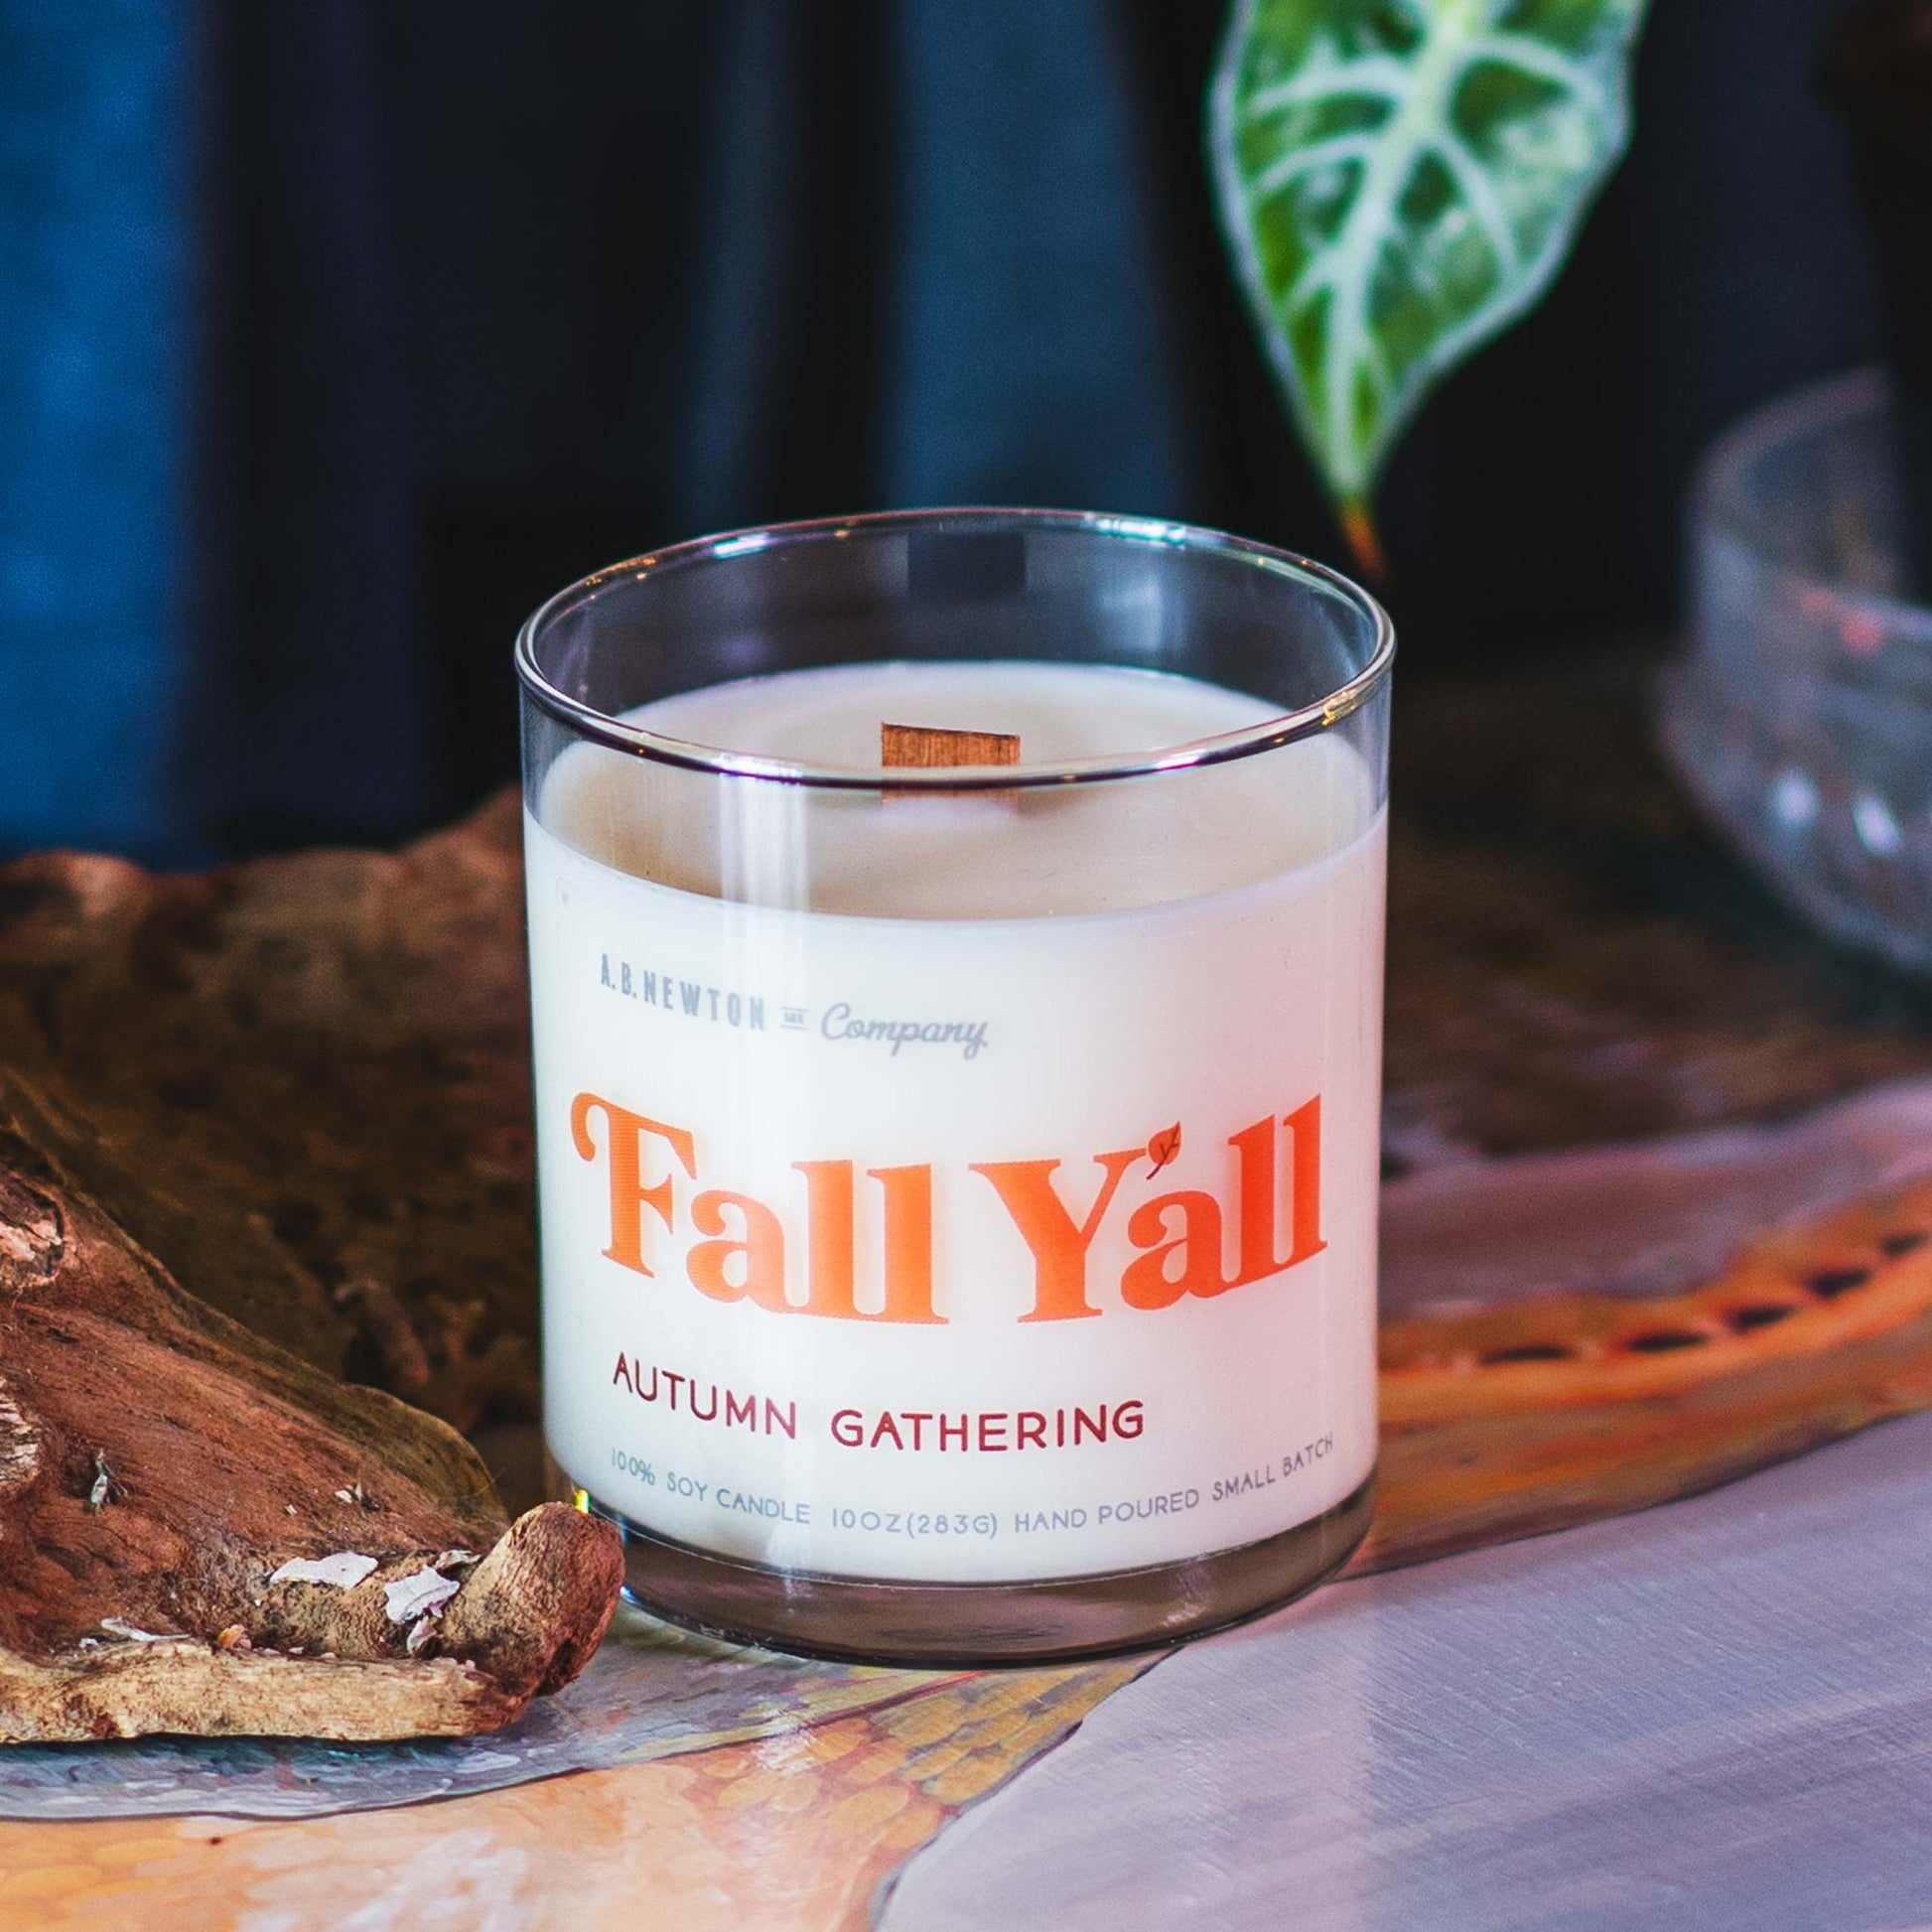 Fall Y'all Autumn Gathering Scented Soy Candle Hand Poured Small Batch - A. B. Newton and Company